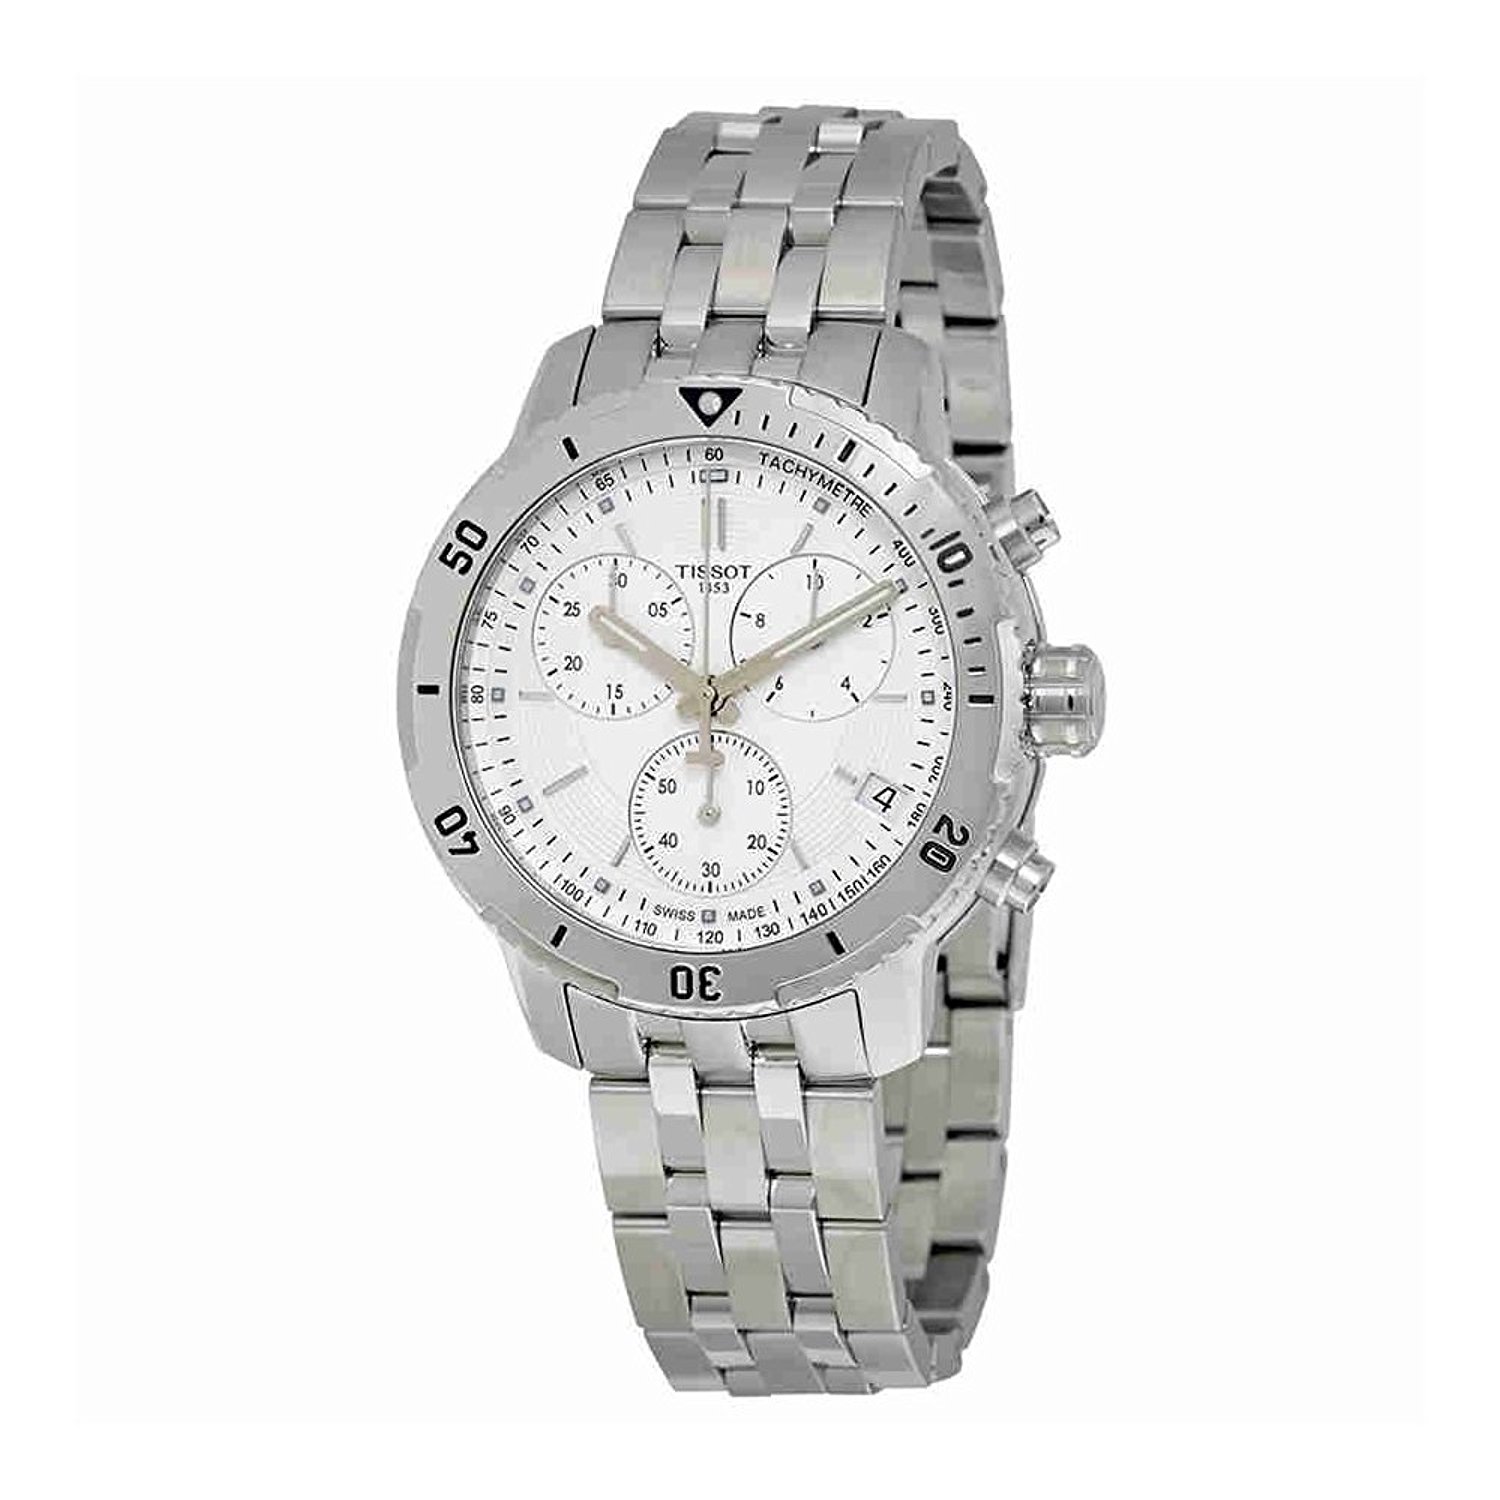 Tissot Silver Dial Uni-directional Rotating Stainless Steel Band Watch #T067.417.22.031.01 (Men Watch)